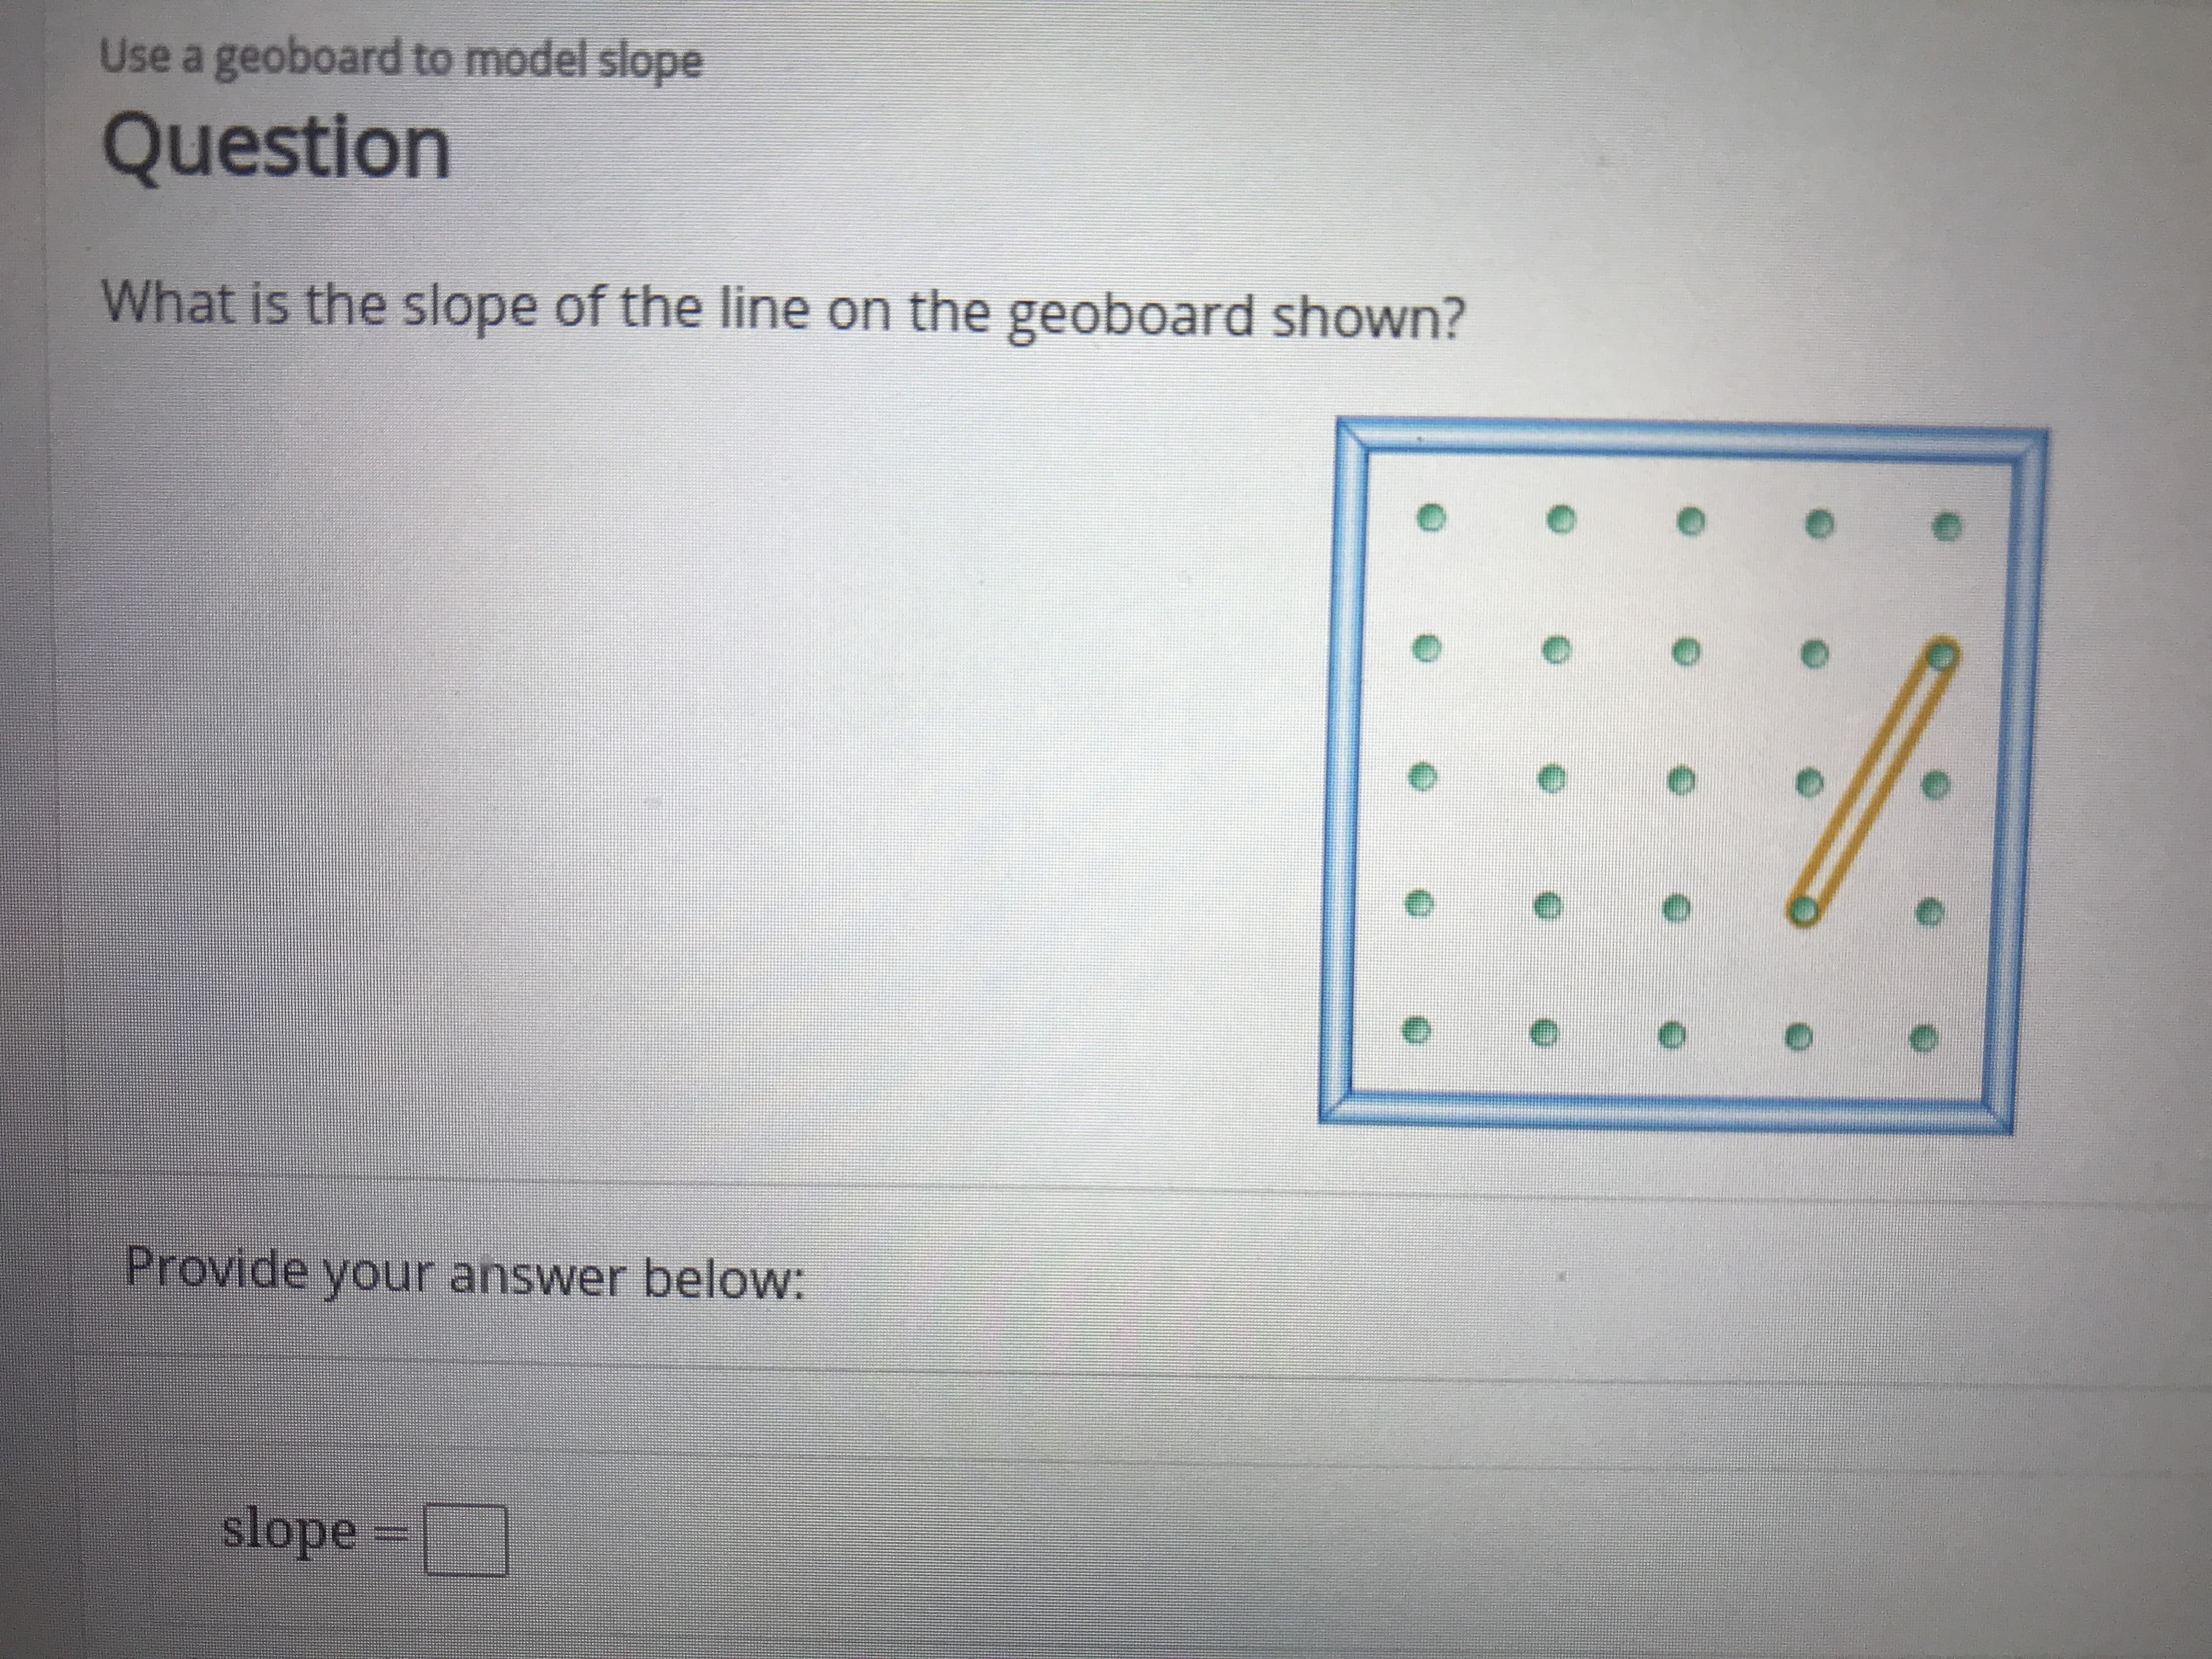 Use a geoboard to model slope
Question
What is the slope of the line on the geoboard shown?
Provide your answer below:
slope
